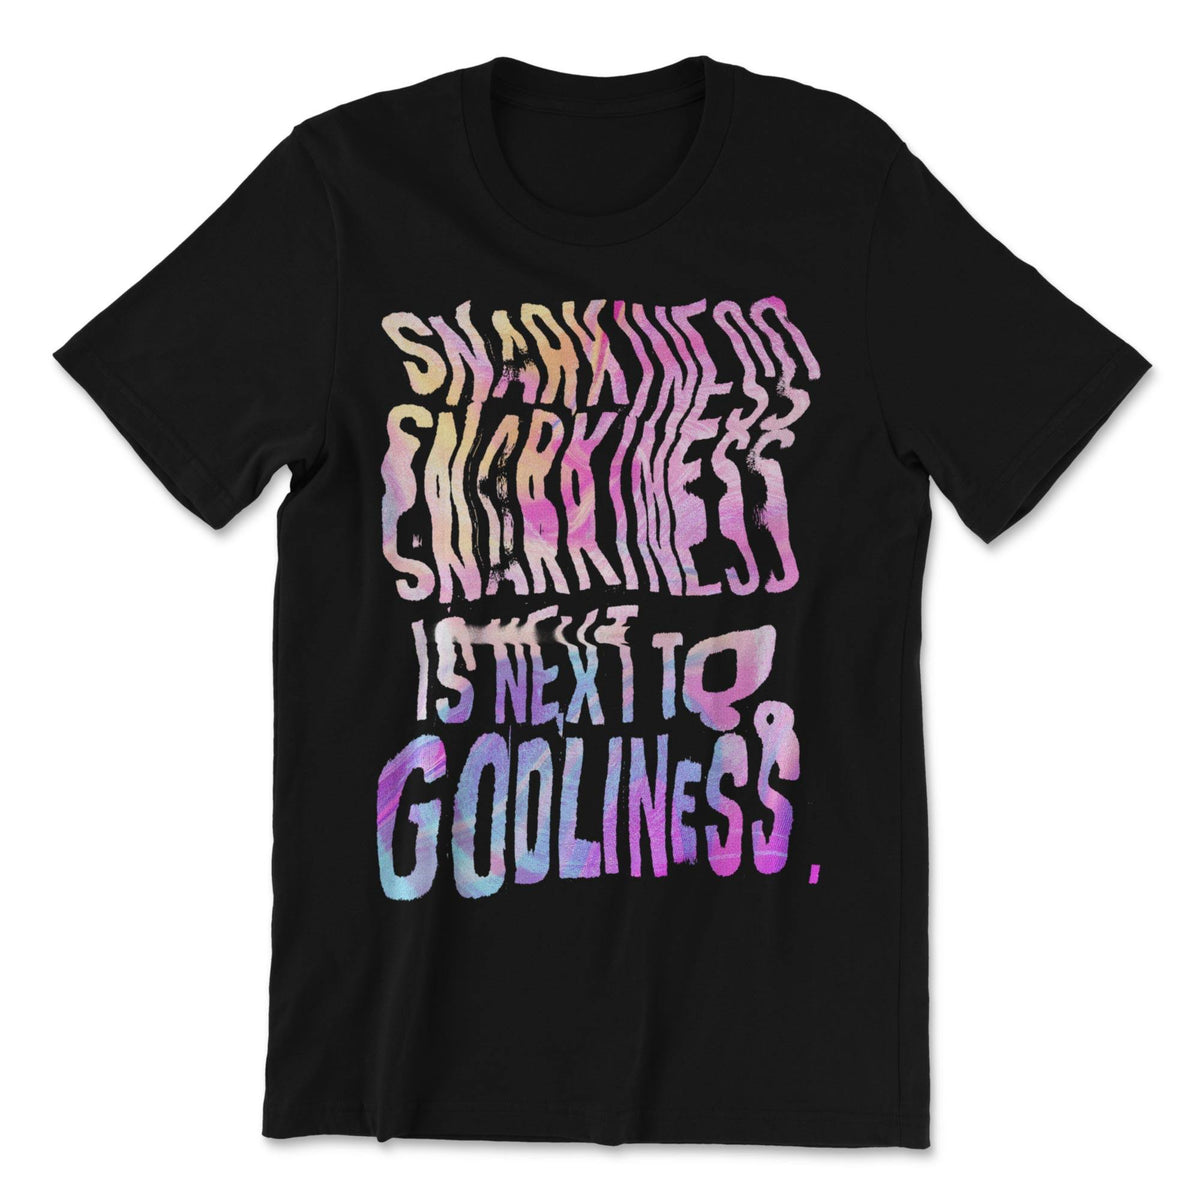 Snarkiness Is Next To Godliness Melting Ink Glitch Text - No System